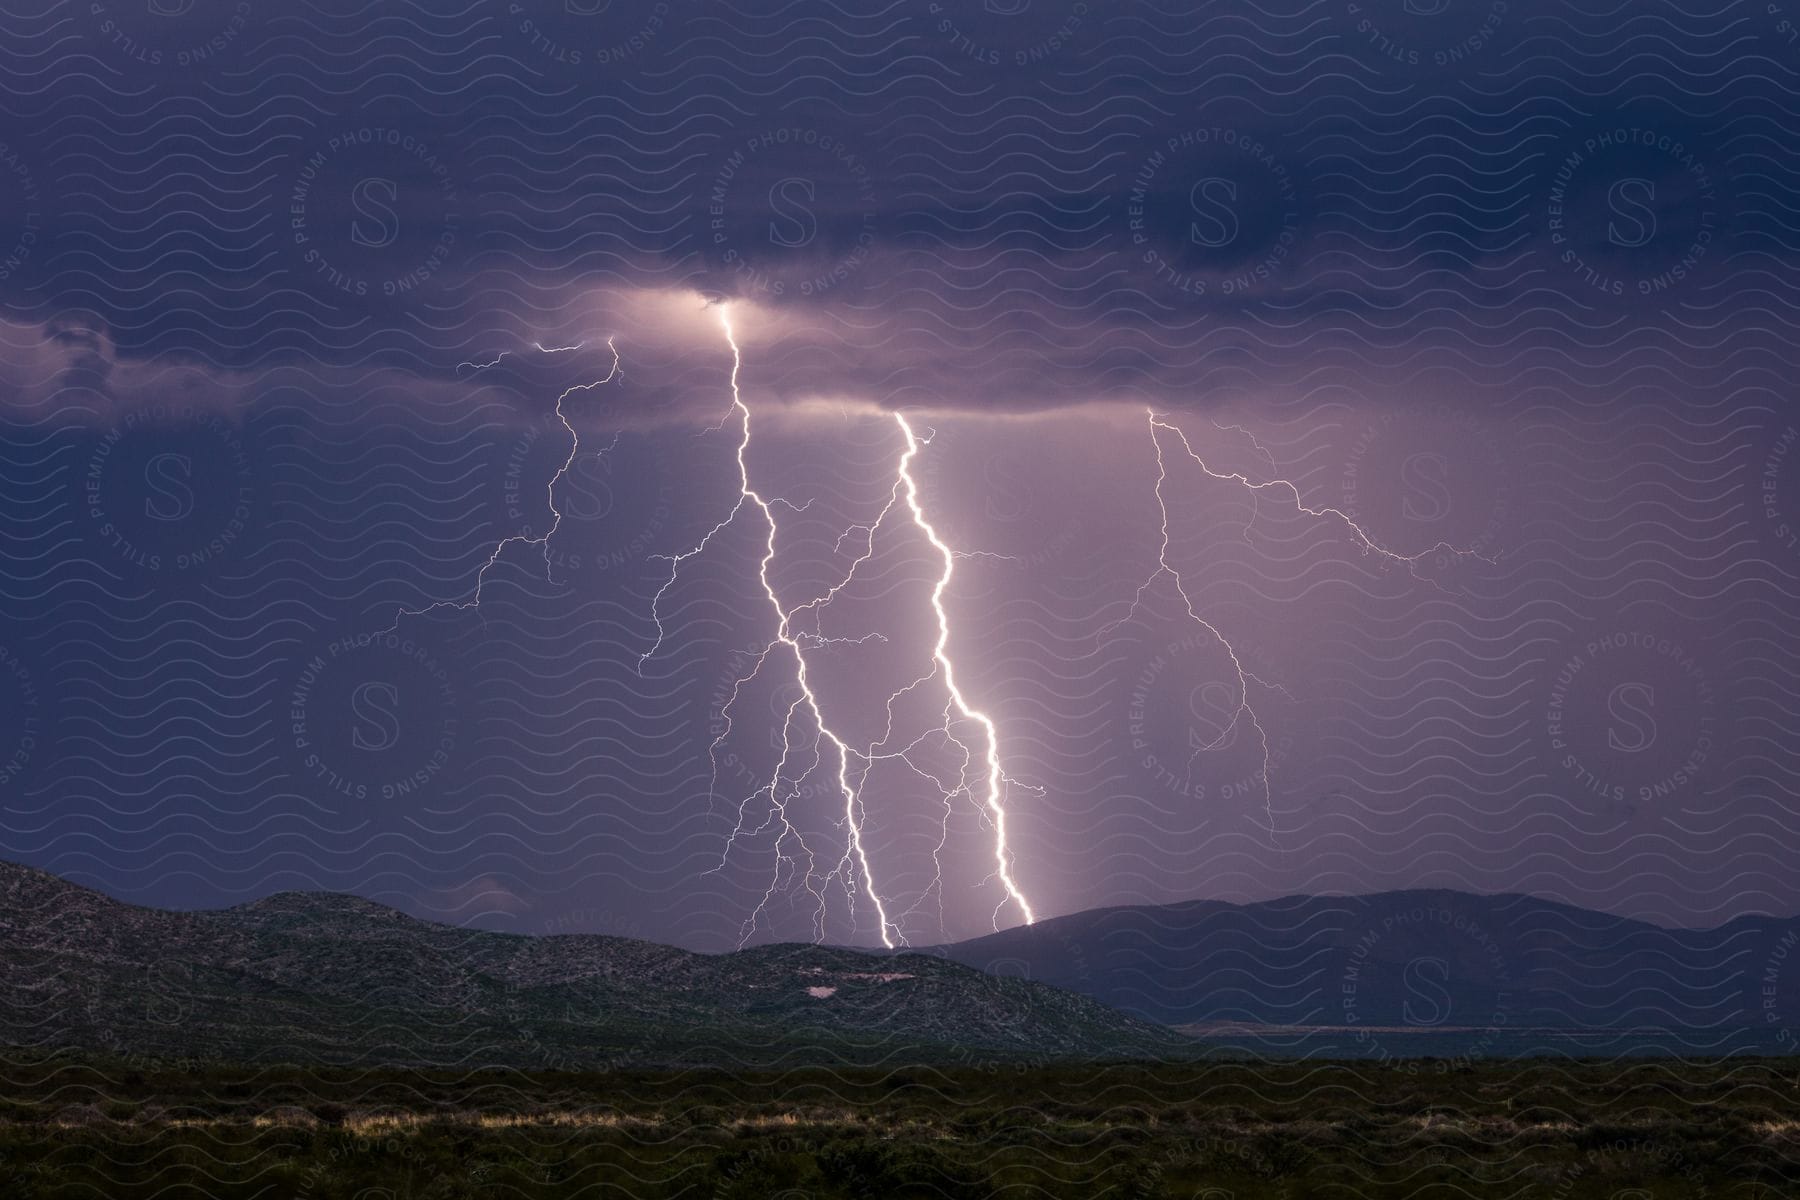 Multiple lightning bolts strike a mountain range illuminating the grasslands in the foreground